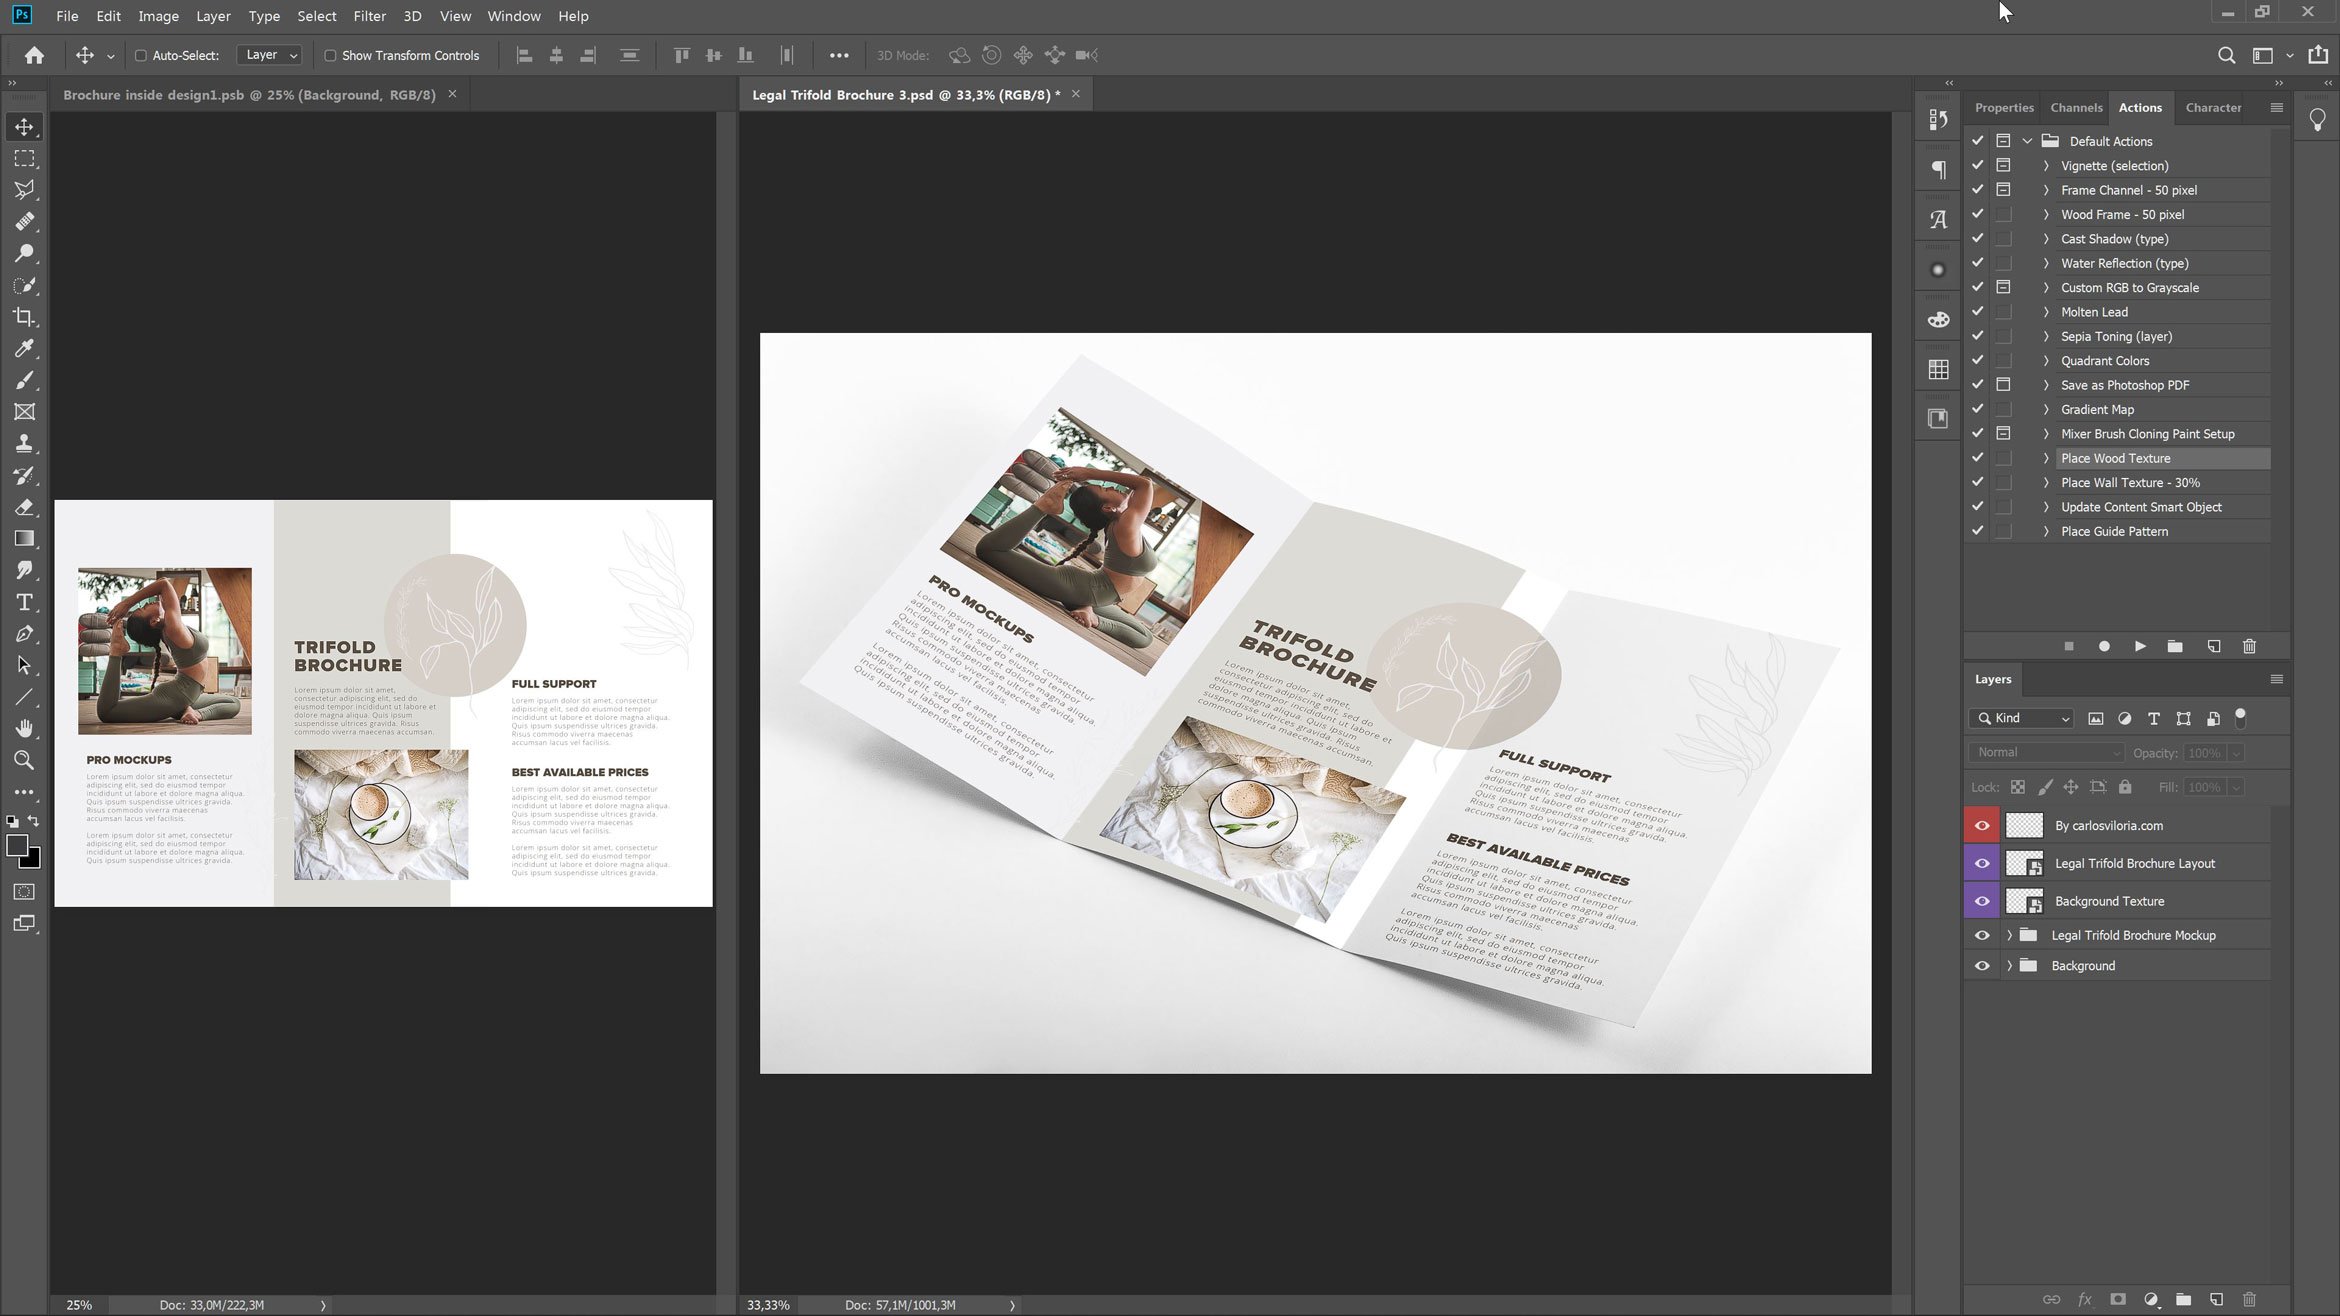 Legal Trifold Brochure Mockup – Open preview image.